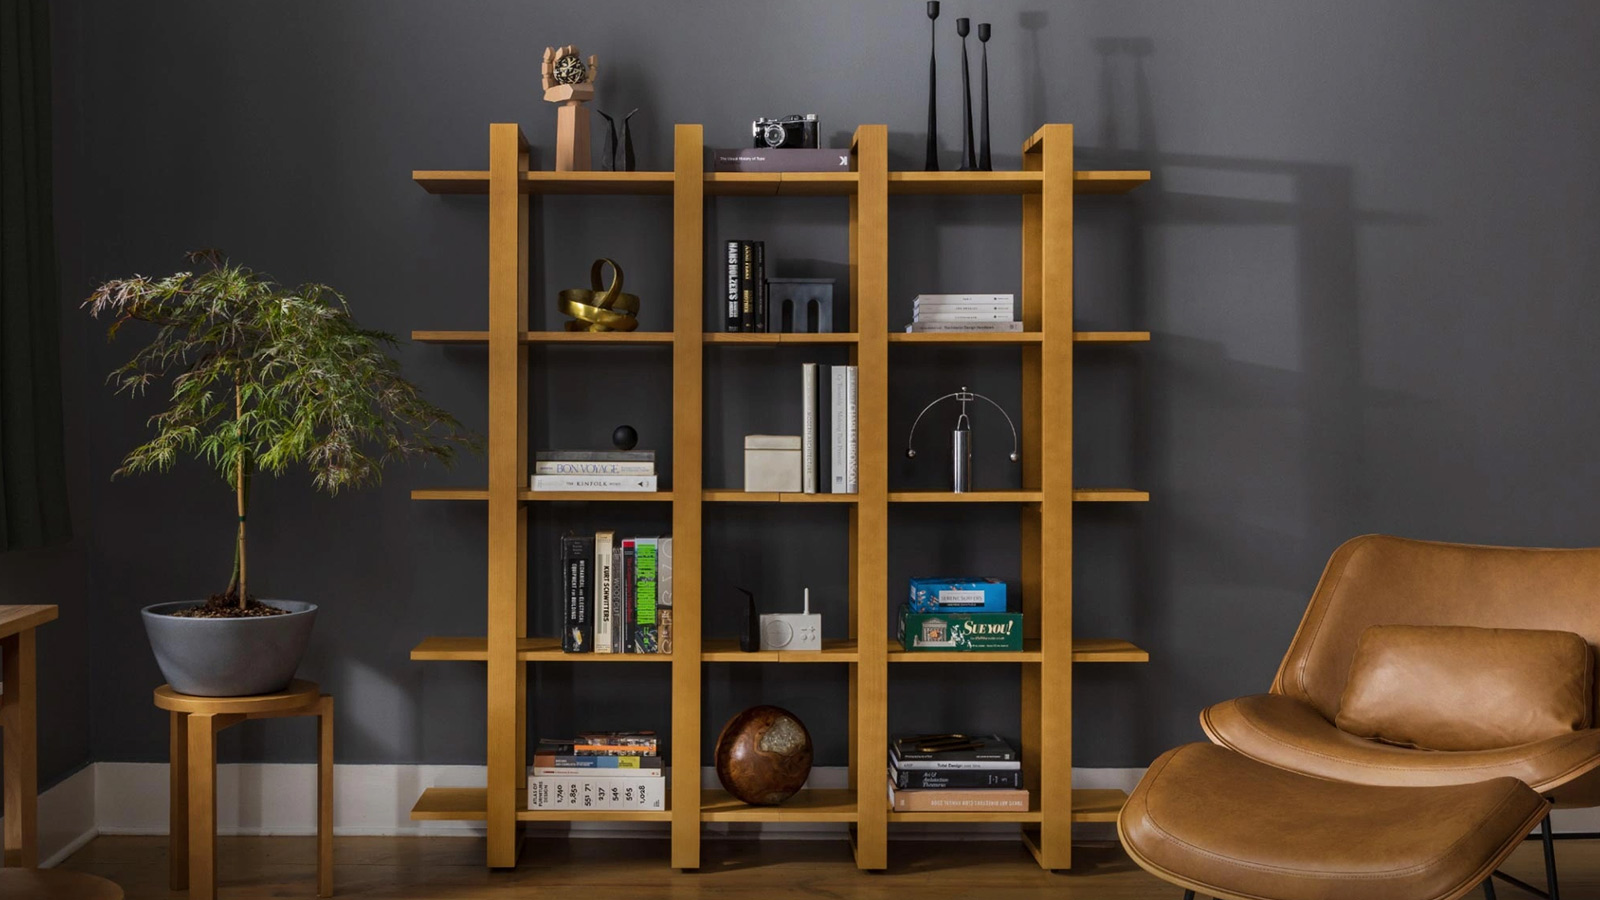 The image features a contemporary living space with a dark gray wall. Centered in the image is a large, light wooden bookshelf filled with various objects. The bookshelf houses an assortment of items including books, decorative sculptures, a small plant, a camera, a brass bowl, a globe, and some electronic devices. To the left, there is a small wooden table upon which a potted Japanese maple bonsai tree is placed. To the right, there's a modern leather lounge chair with a matching ottoman, both in a caramel brown color.